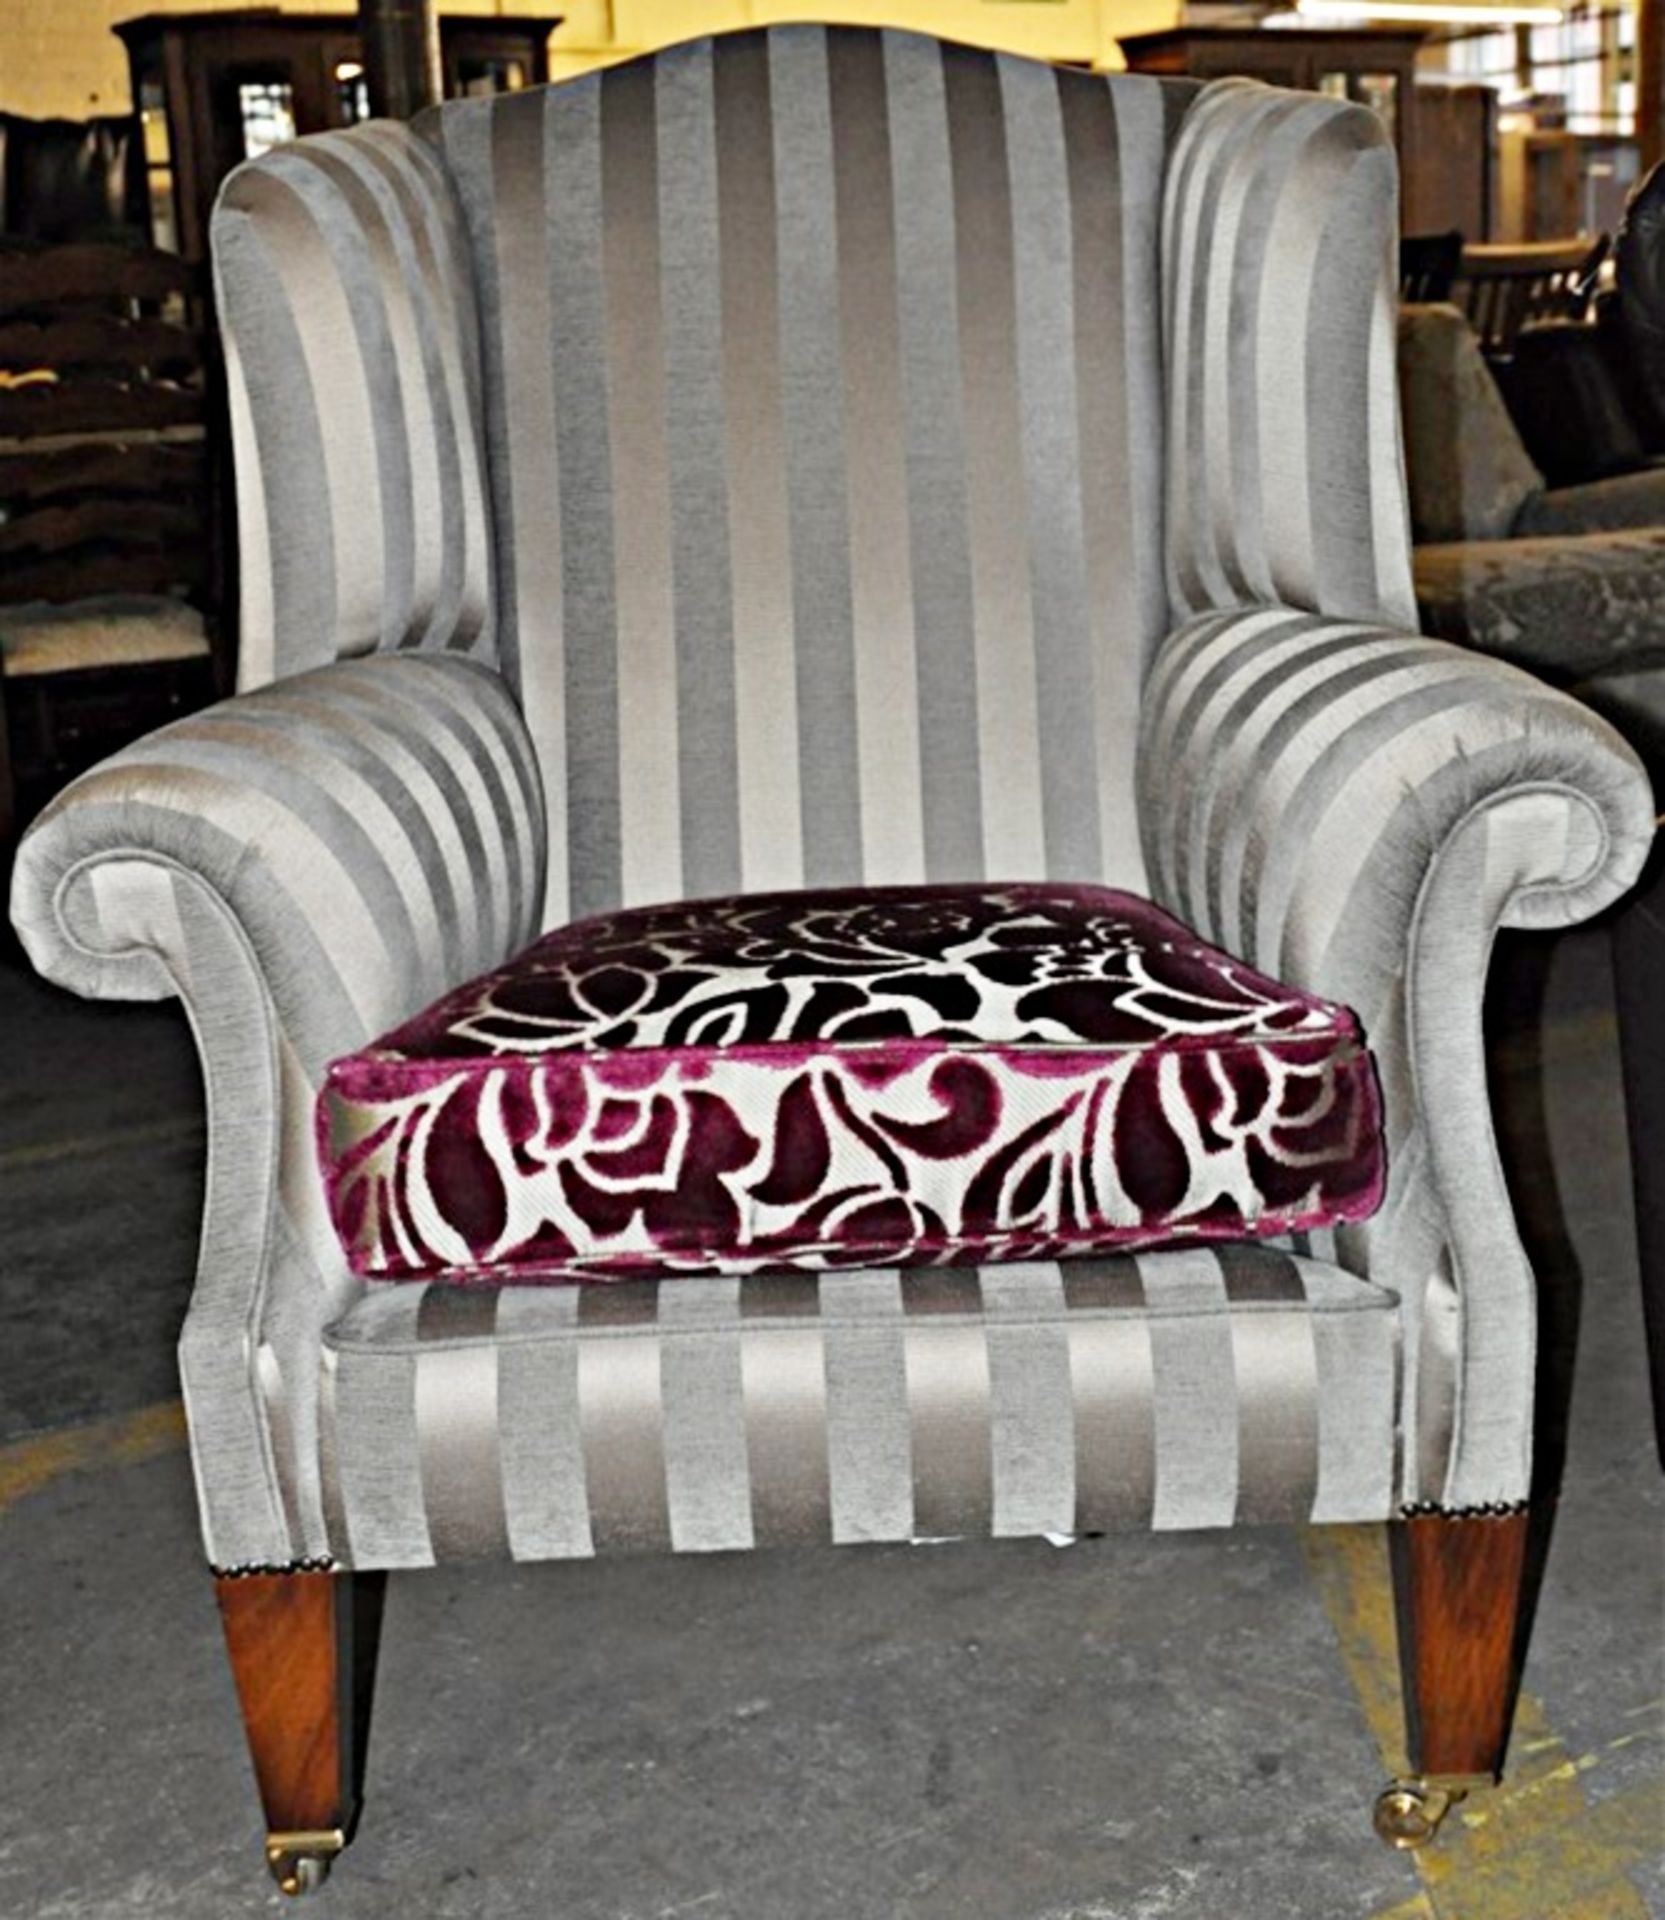 1 x 3 Seater Designer Sofa with Matching Wing Chair by Duresta – £2,250.00 - Ex Display – Sofa - Image 2 of 3